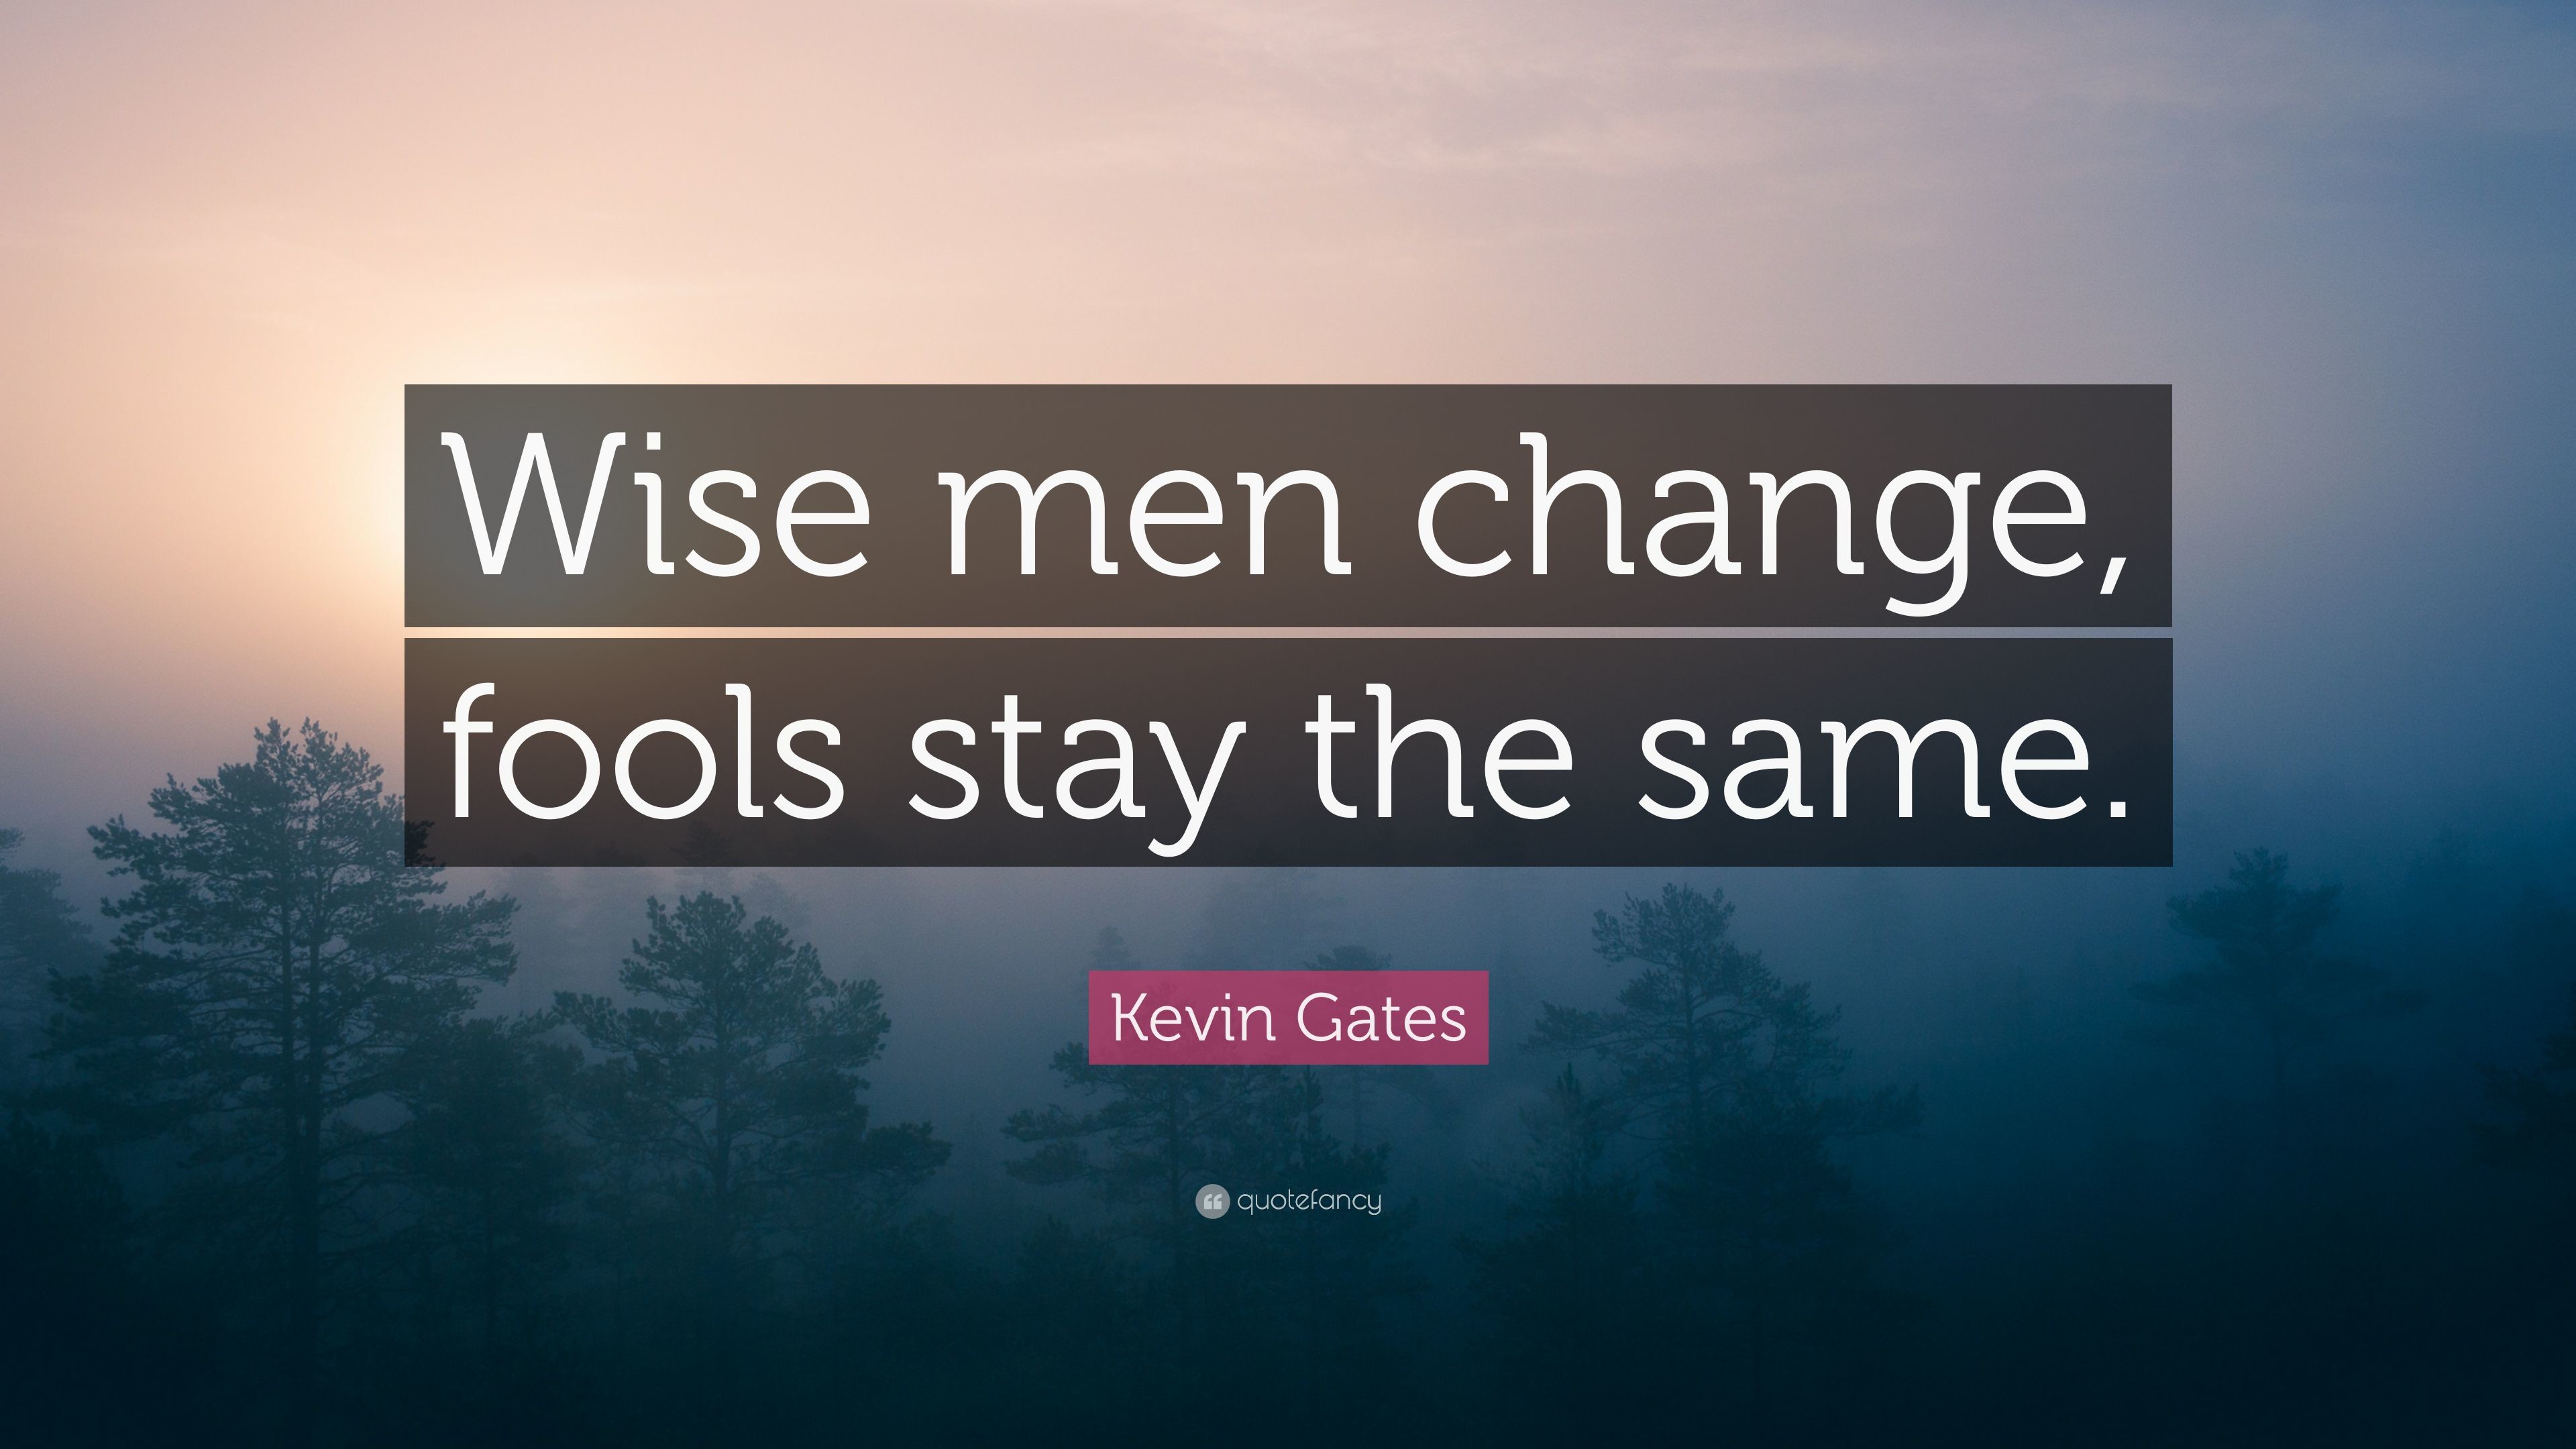 3840x2160 kevin gates quote  wise men change fools stay the same